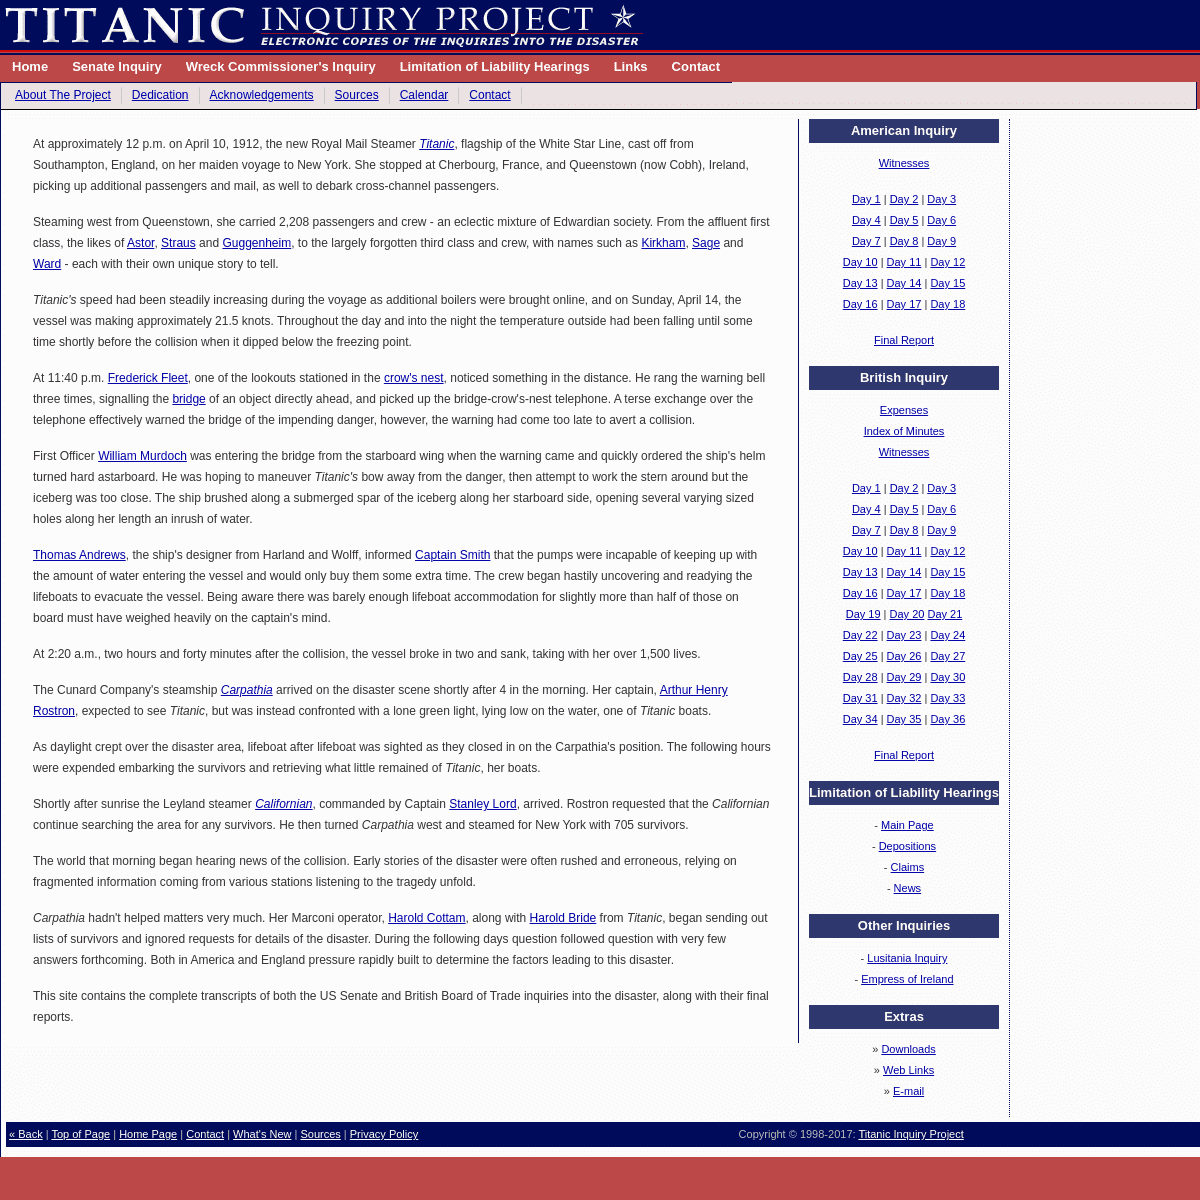 A complete backup of https://titanicinquiry.org